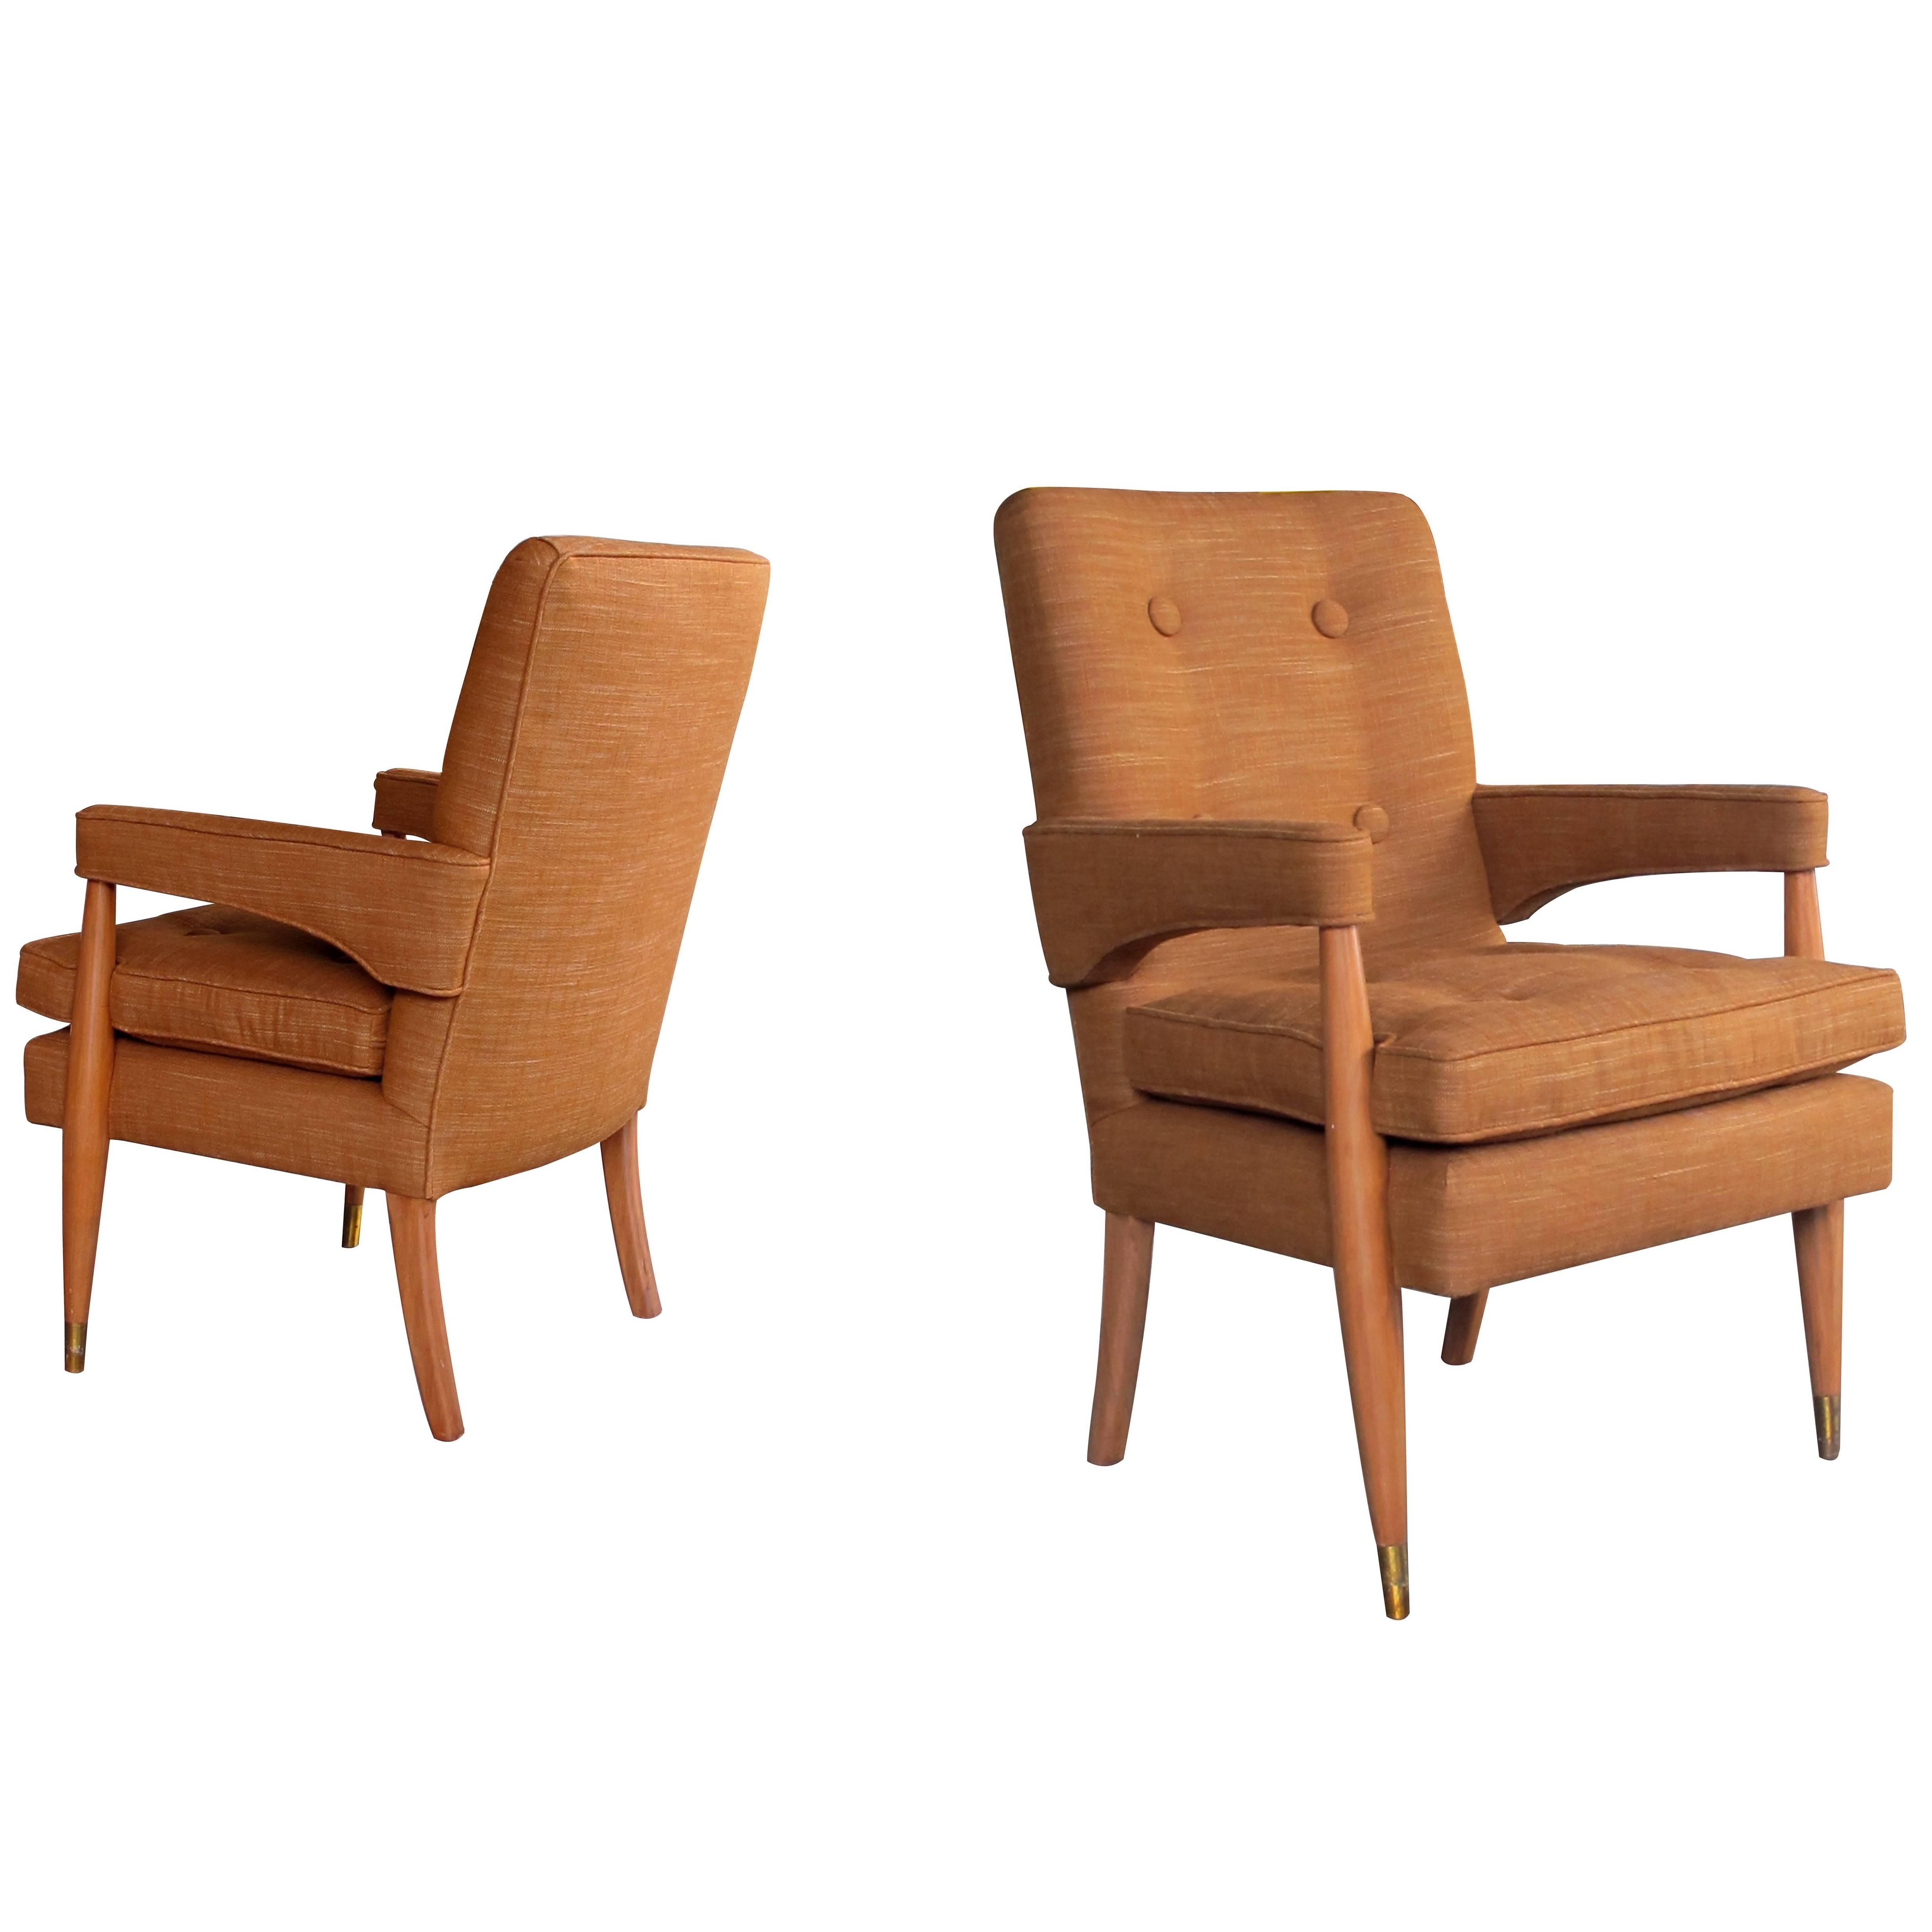 Handsome and Stylish Pair of American Midcentury High-Back Upholstered Armchairs